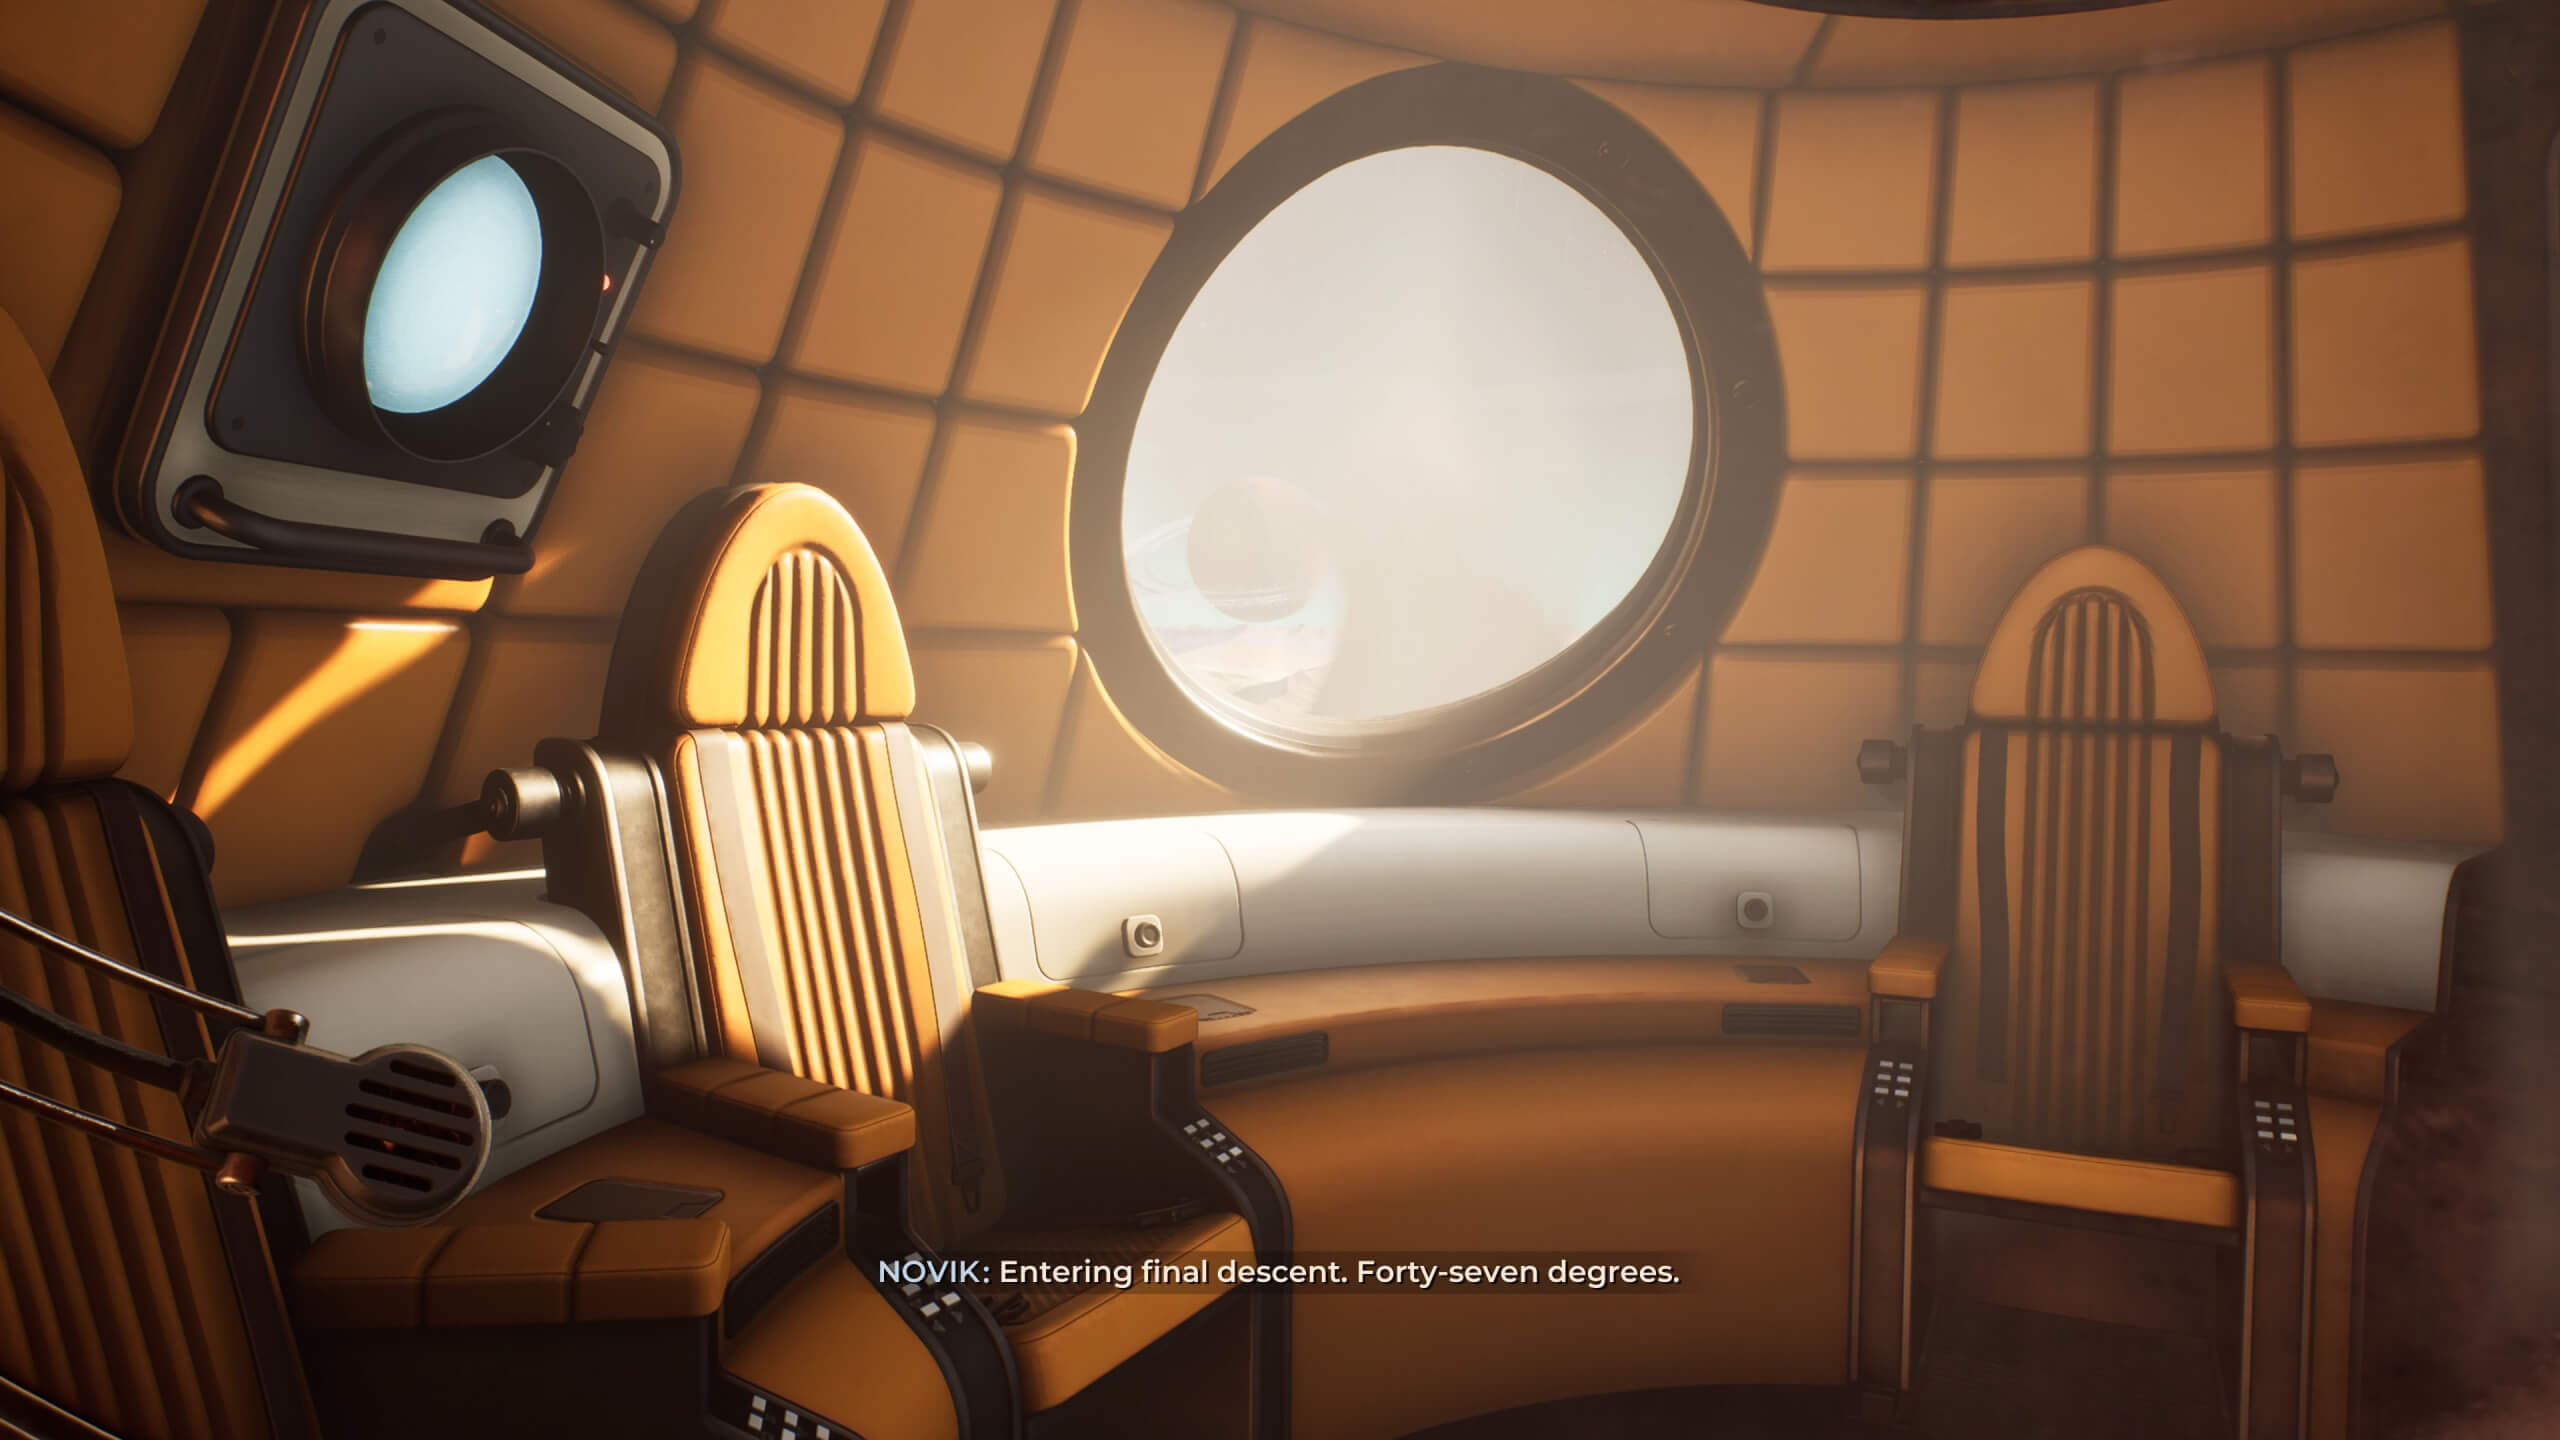 Dr Yasna is inside the retro looking dropship as she goes to the surface of Regis III